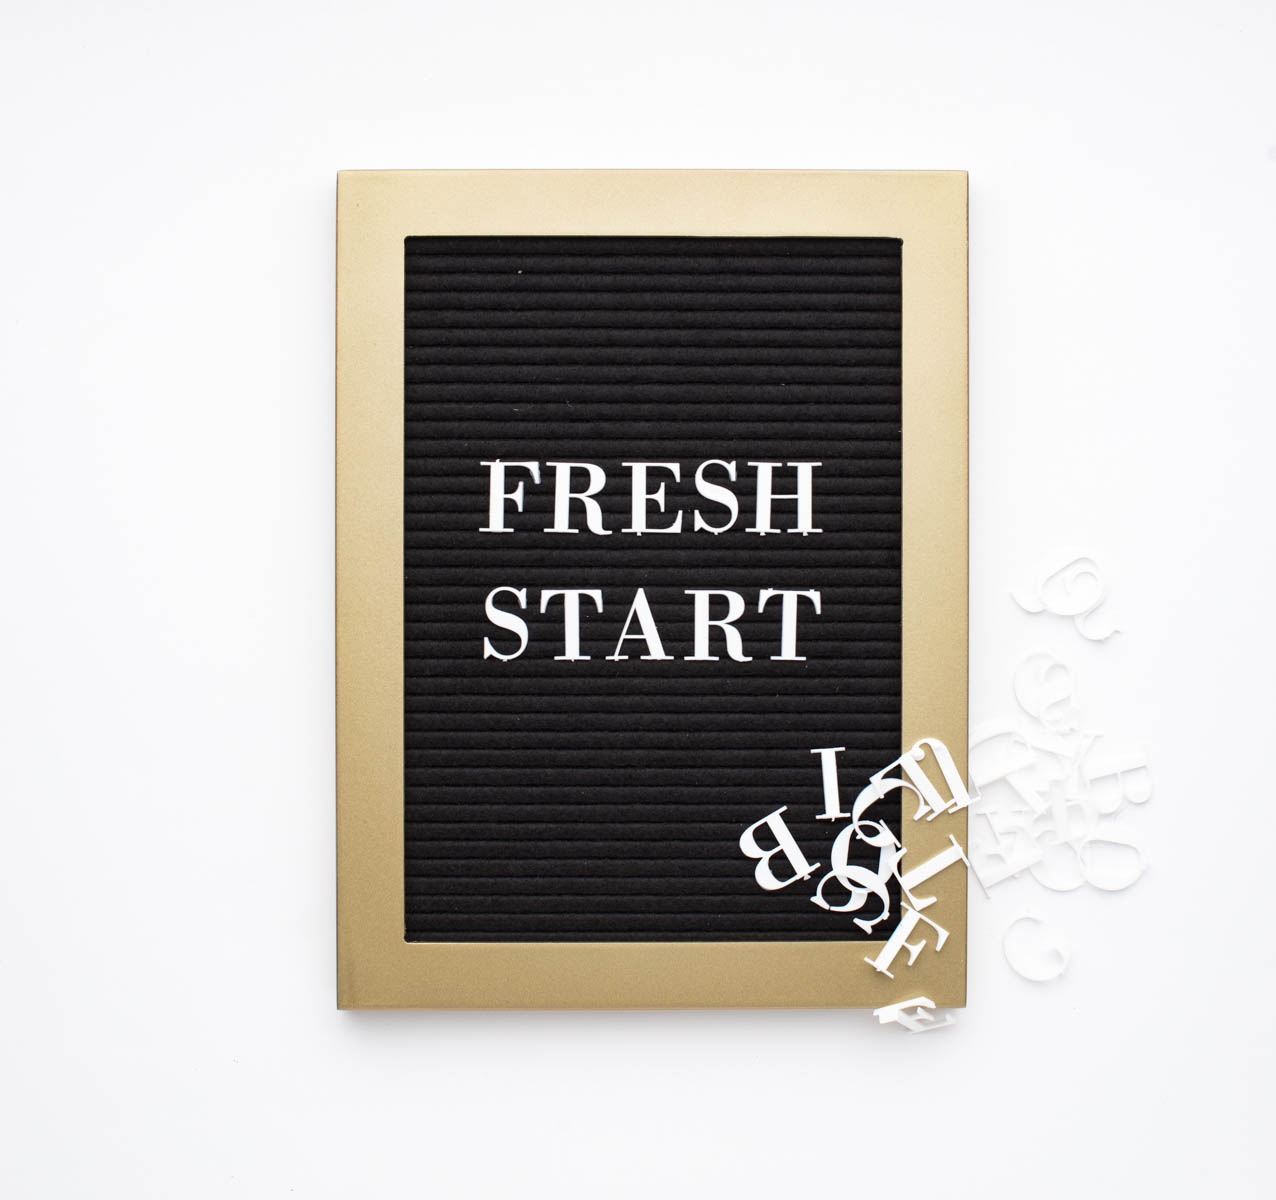 Fresh Start - Reach your 2020 Goals and Stop Breaking Promises to Yourself by Tami Keehn